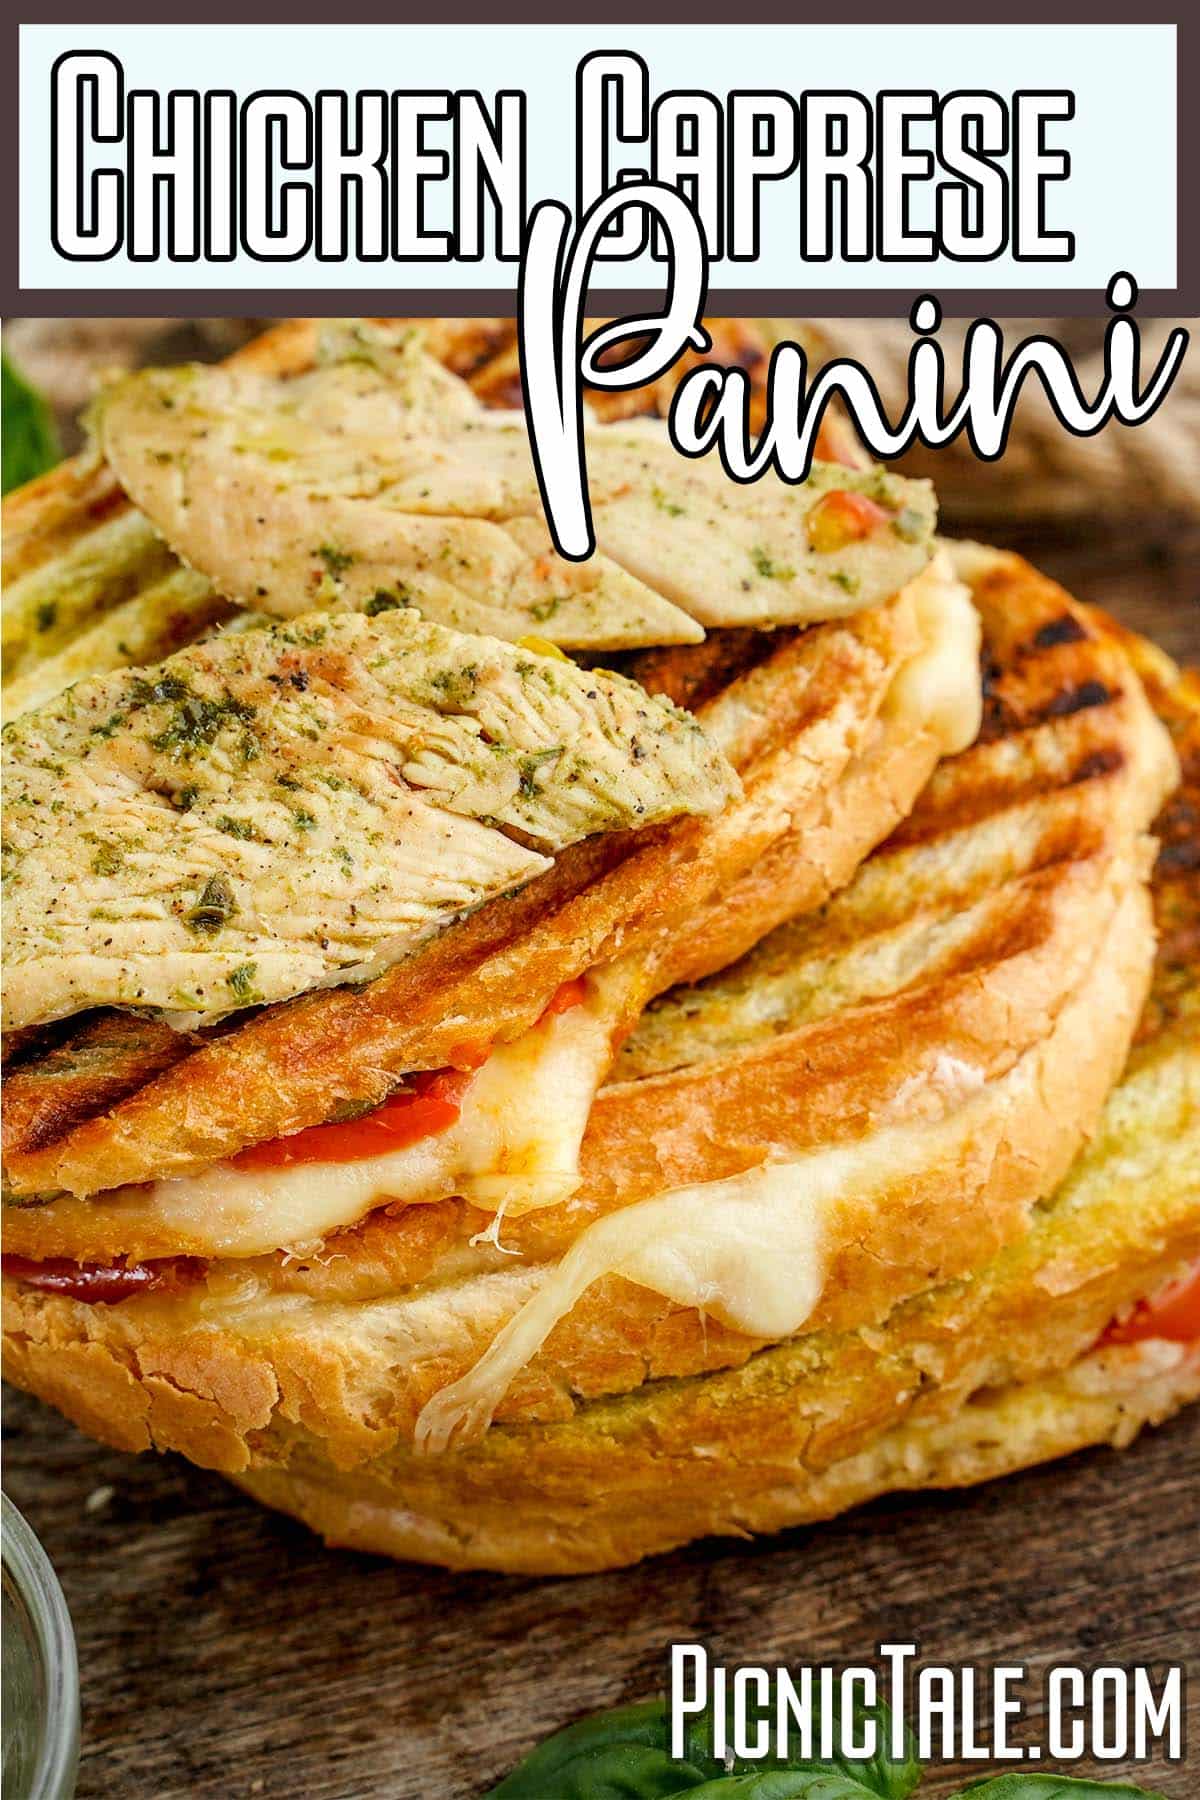 Chicken Caprese Panini, with title and chicken on top.